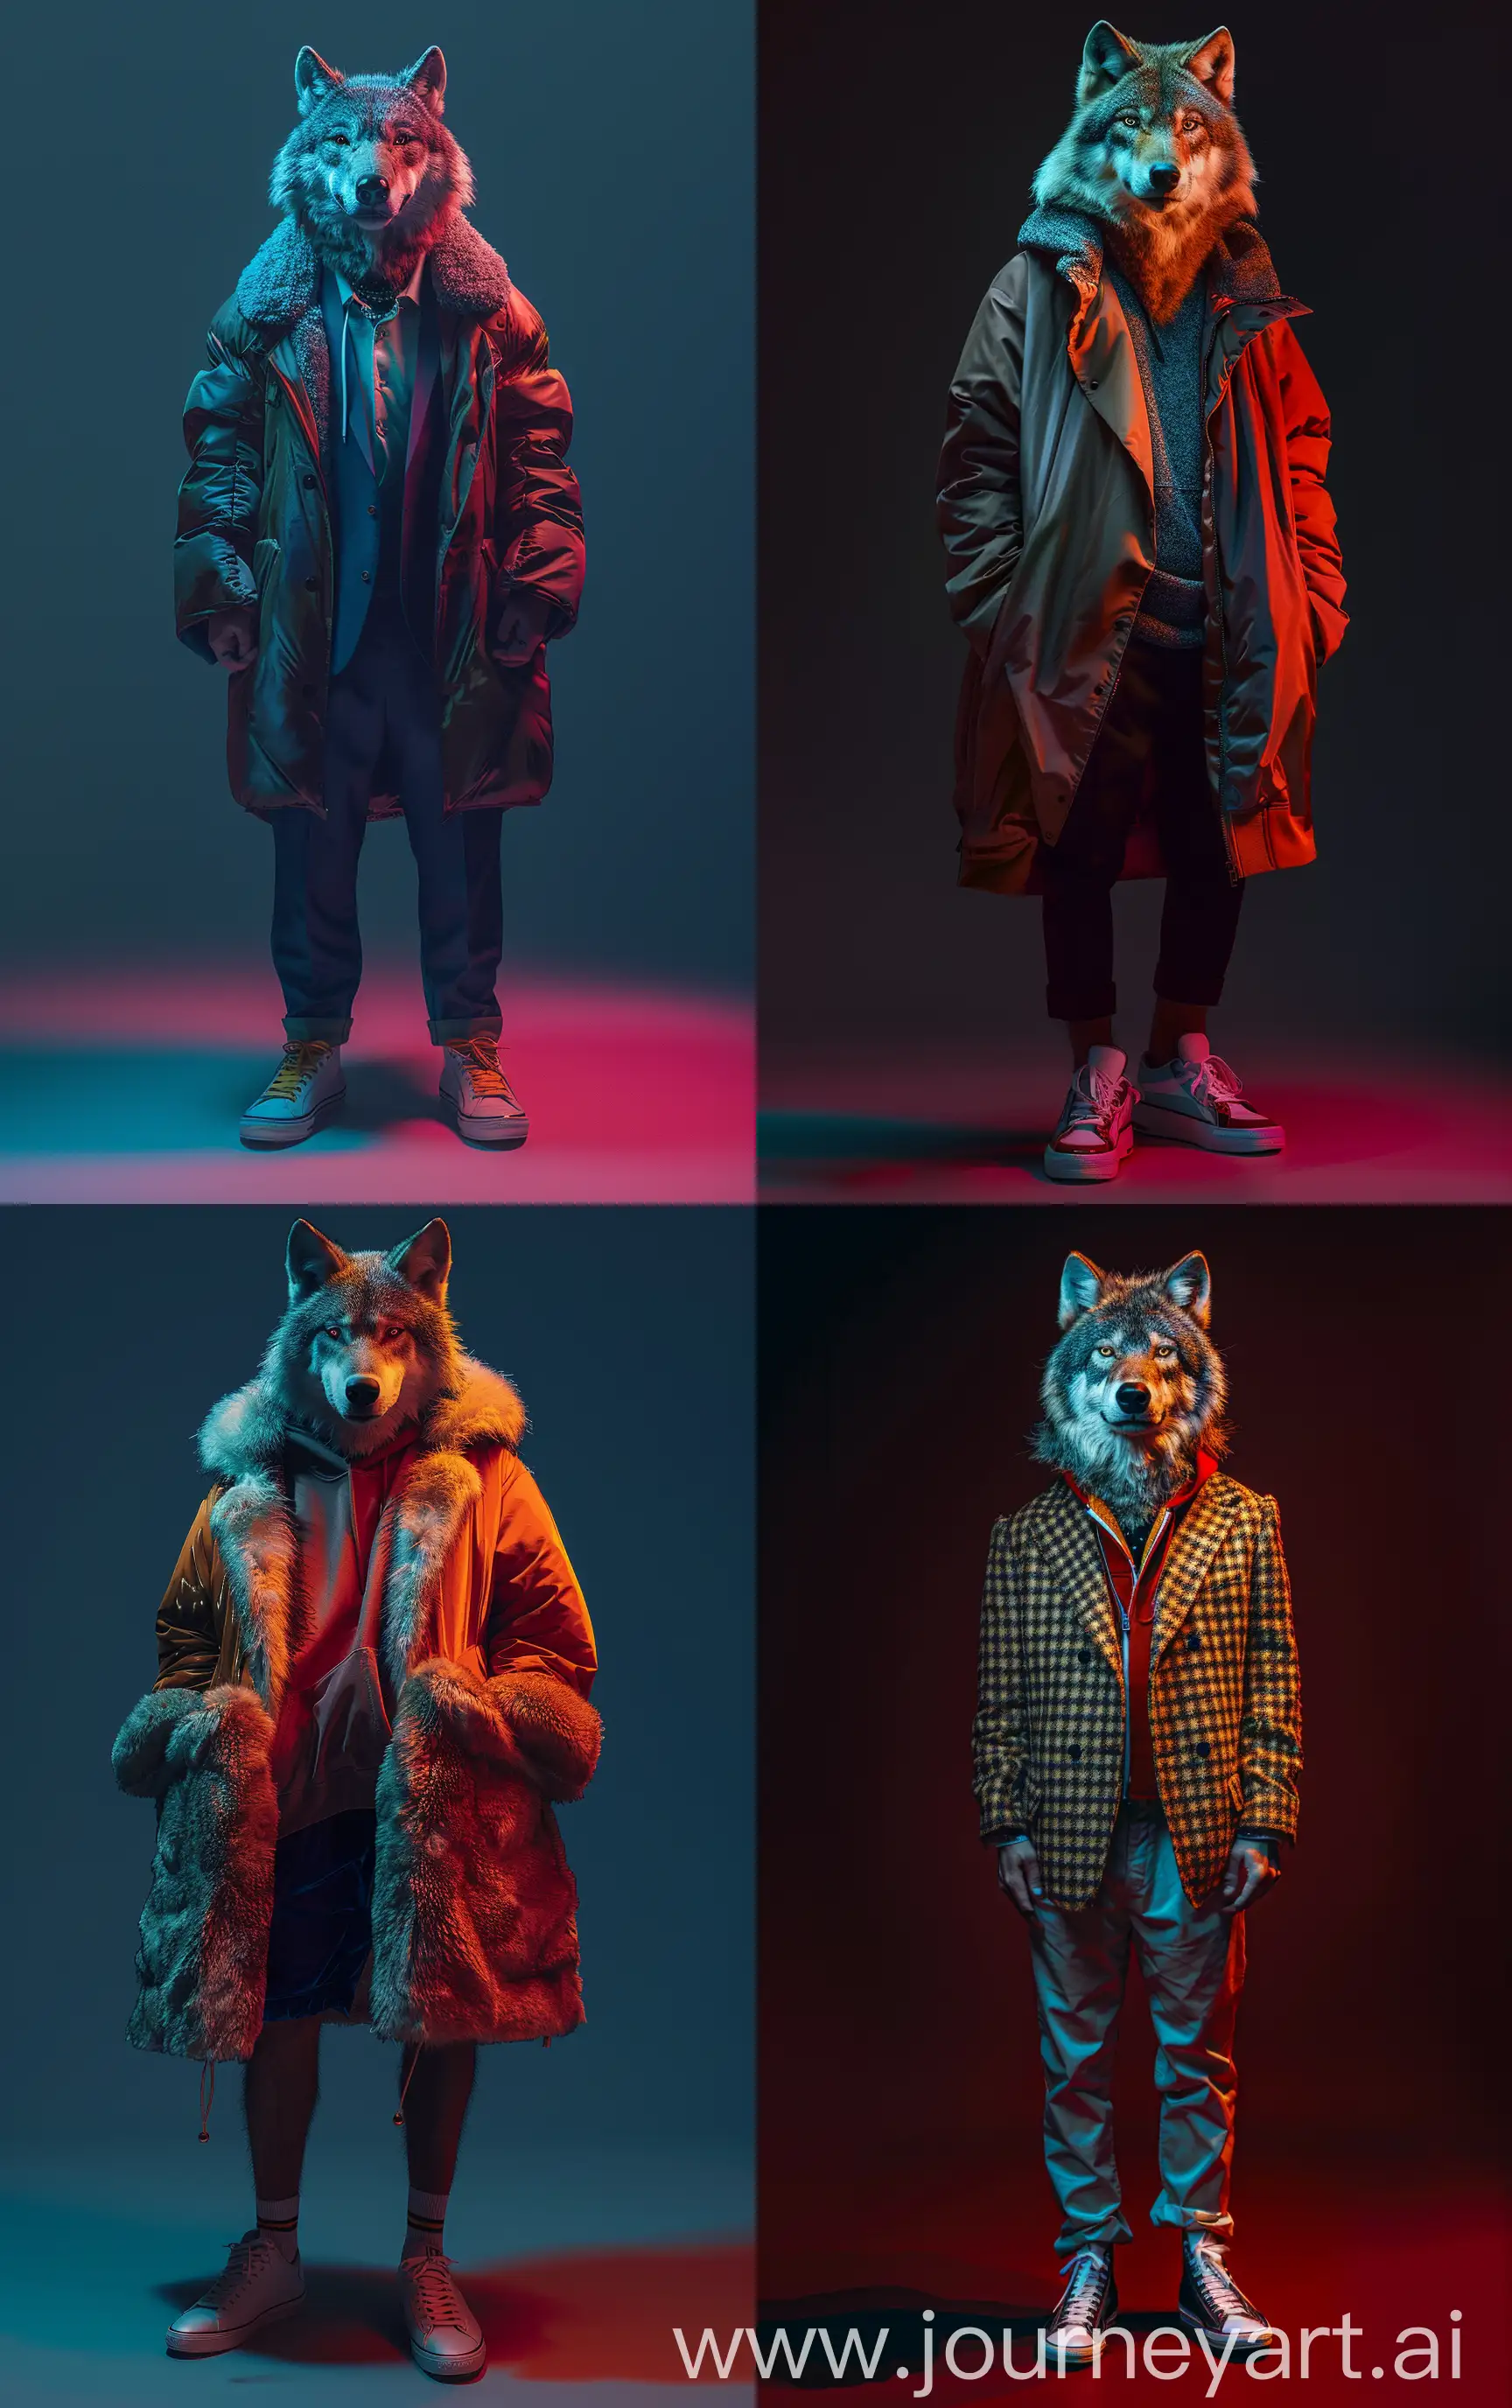 Anthropomorphic-Wolf-Fashionably-Dressed-in-1980s-Luxury-Attire-with-Sneakers